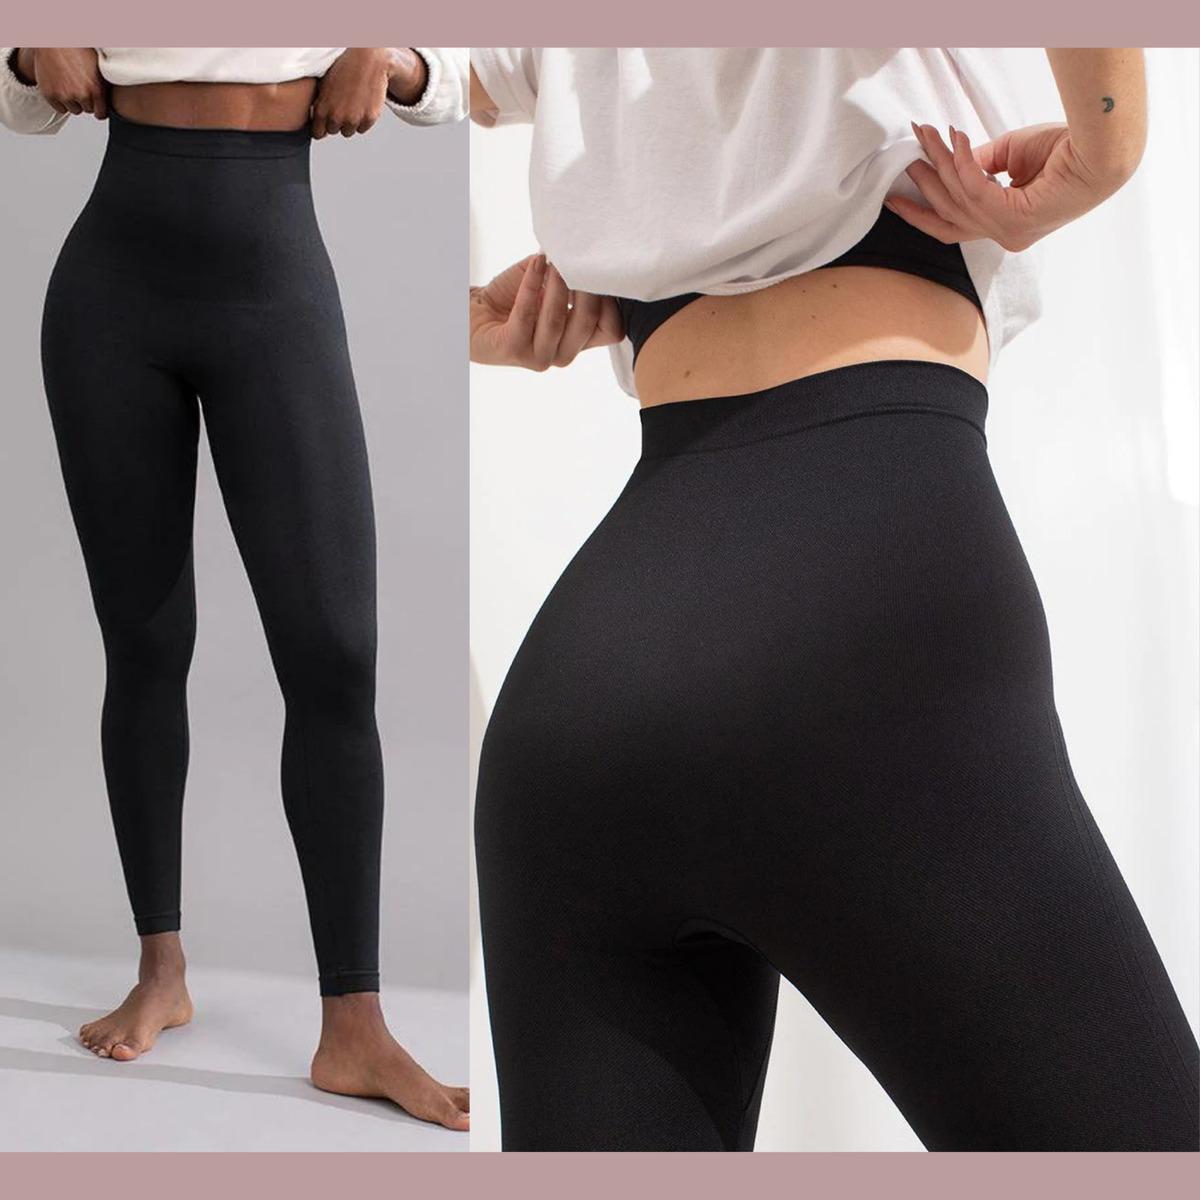 Empetua Black High Waisted Shaping Leggings Size M Size M - $31 - From Kealy